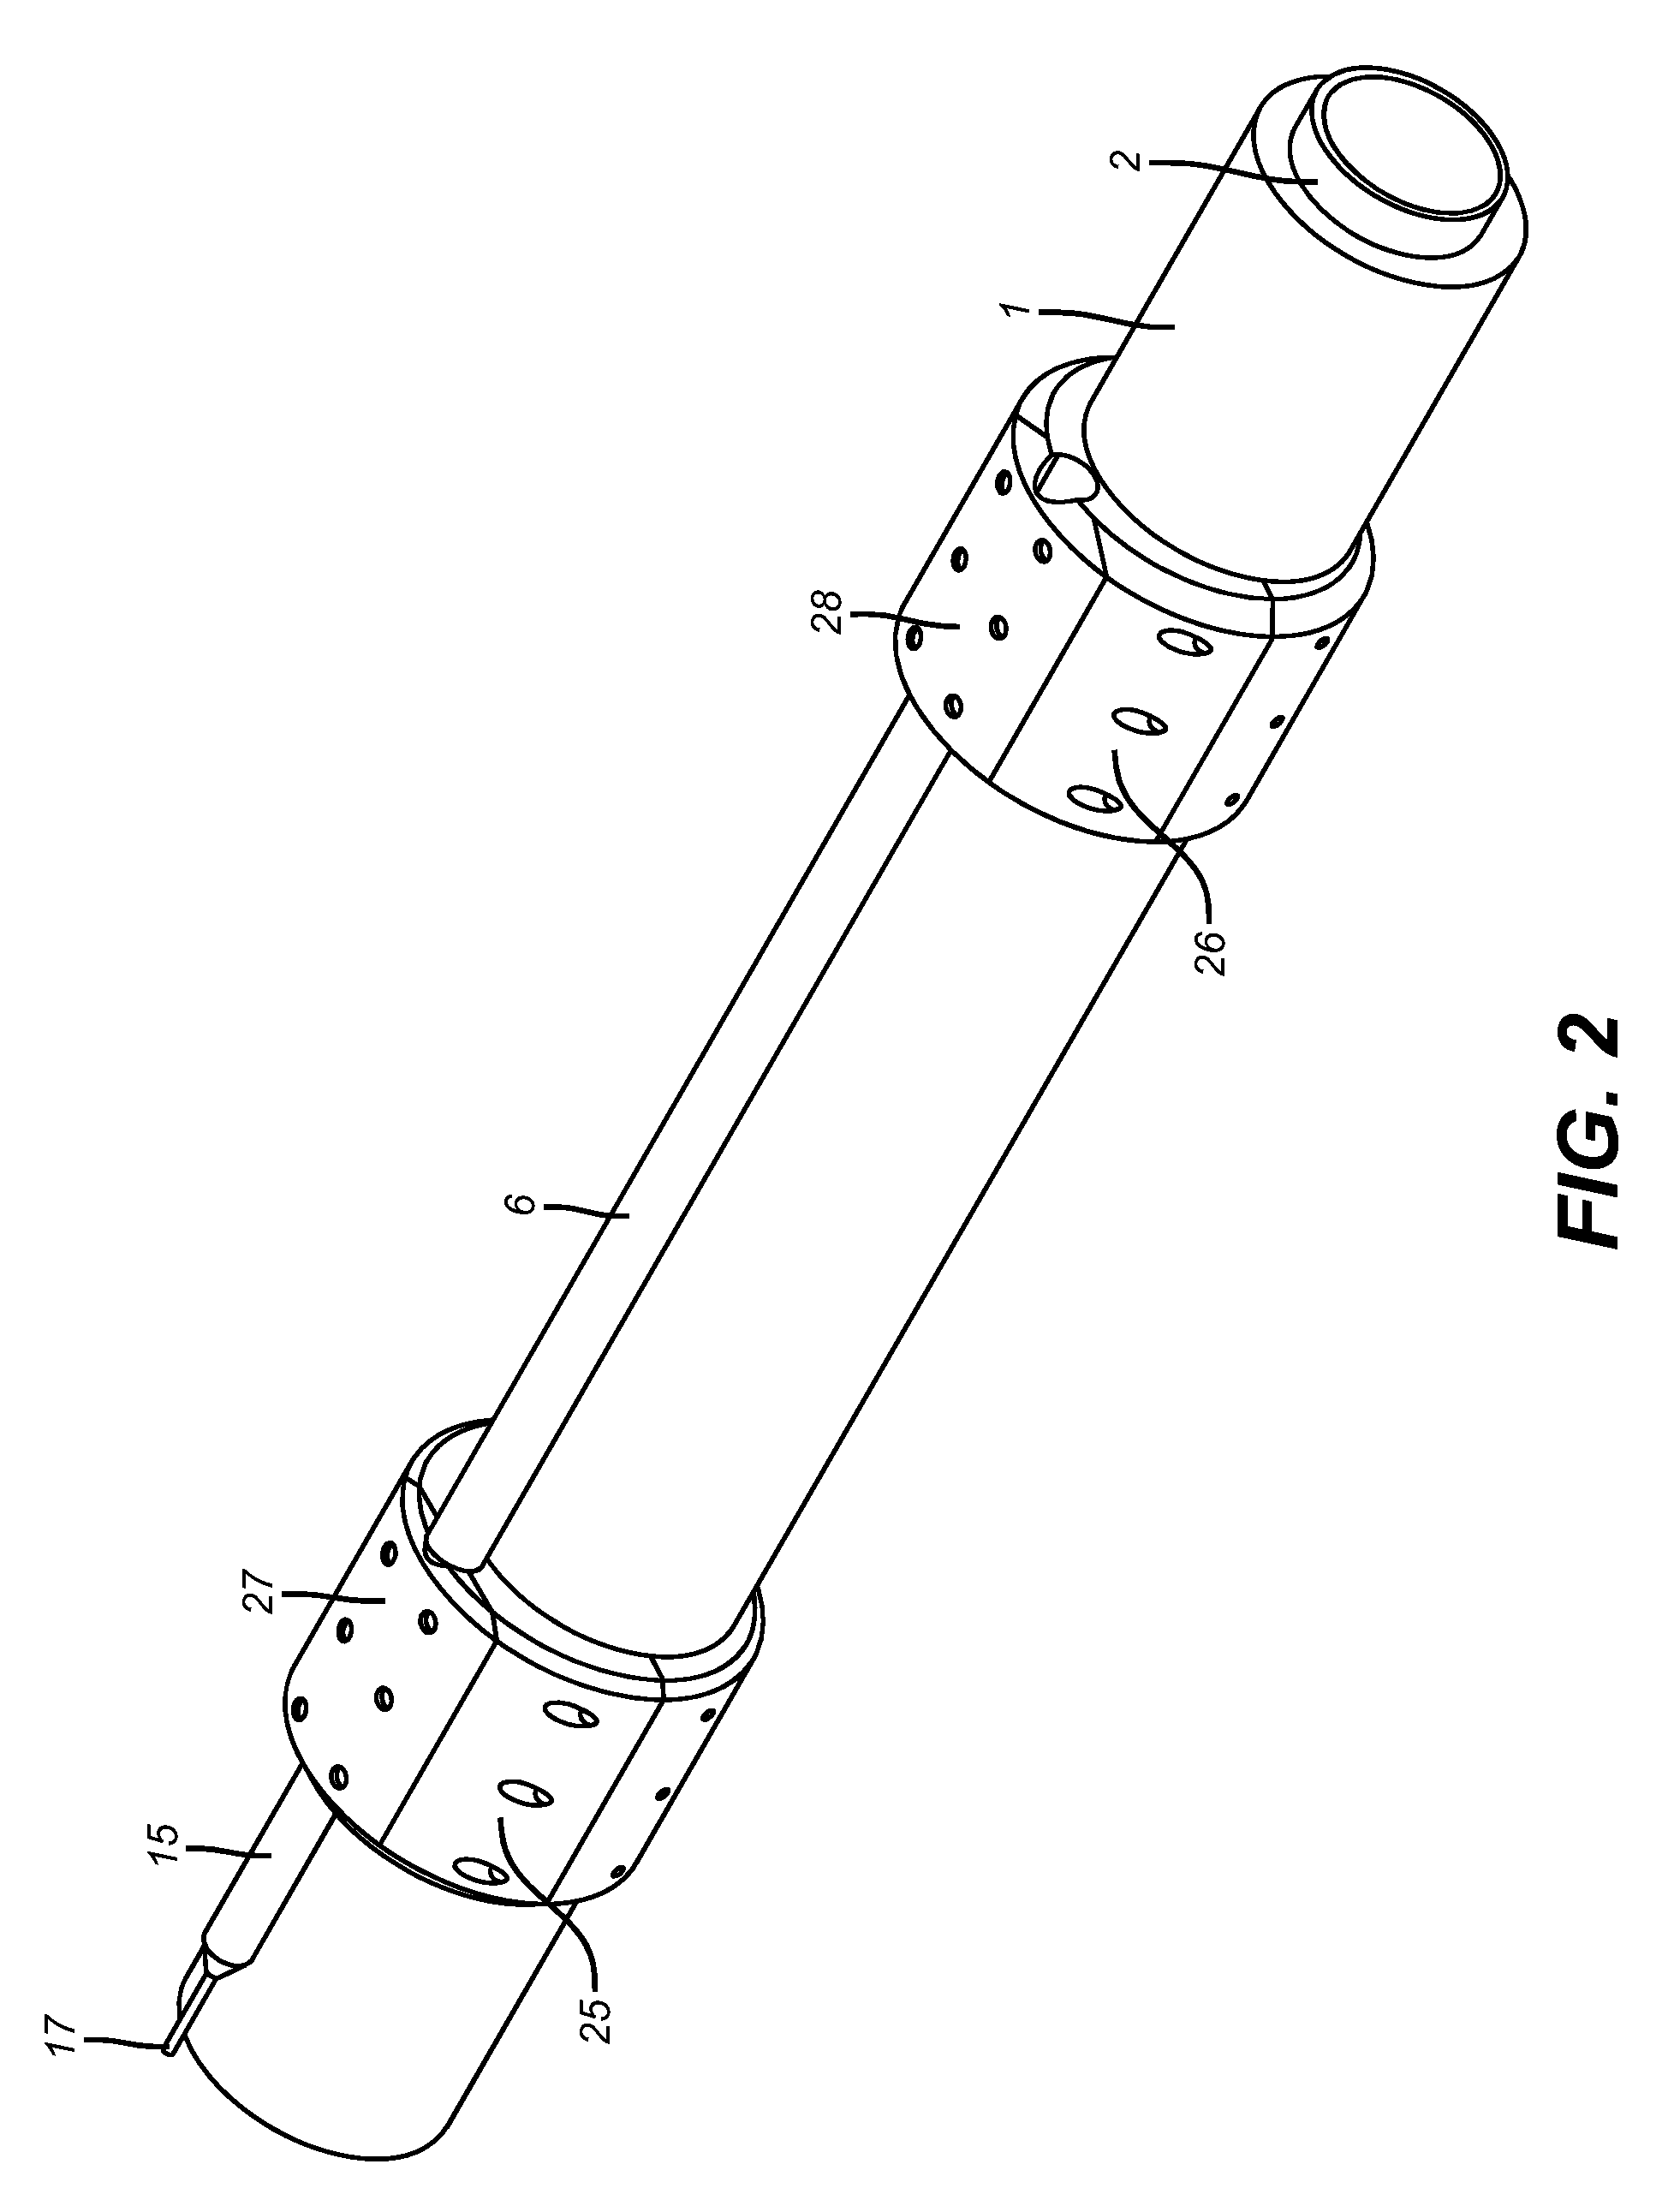 Position Sensor for a Downhole Completion Device